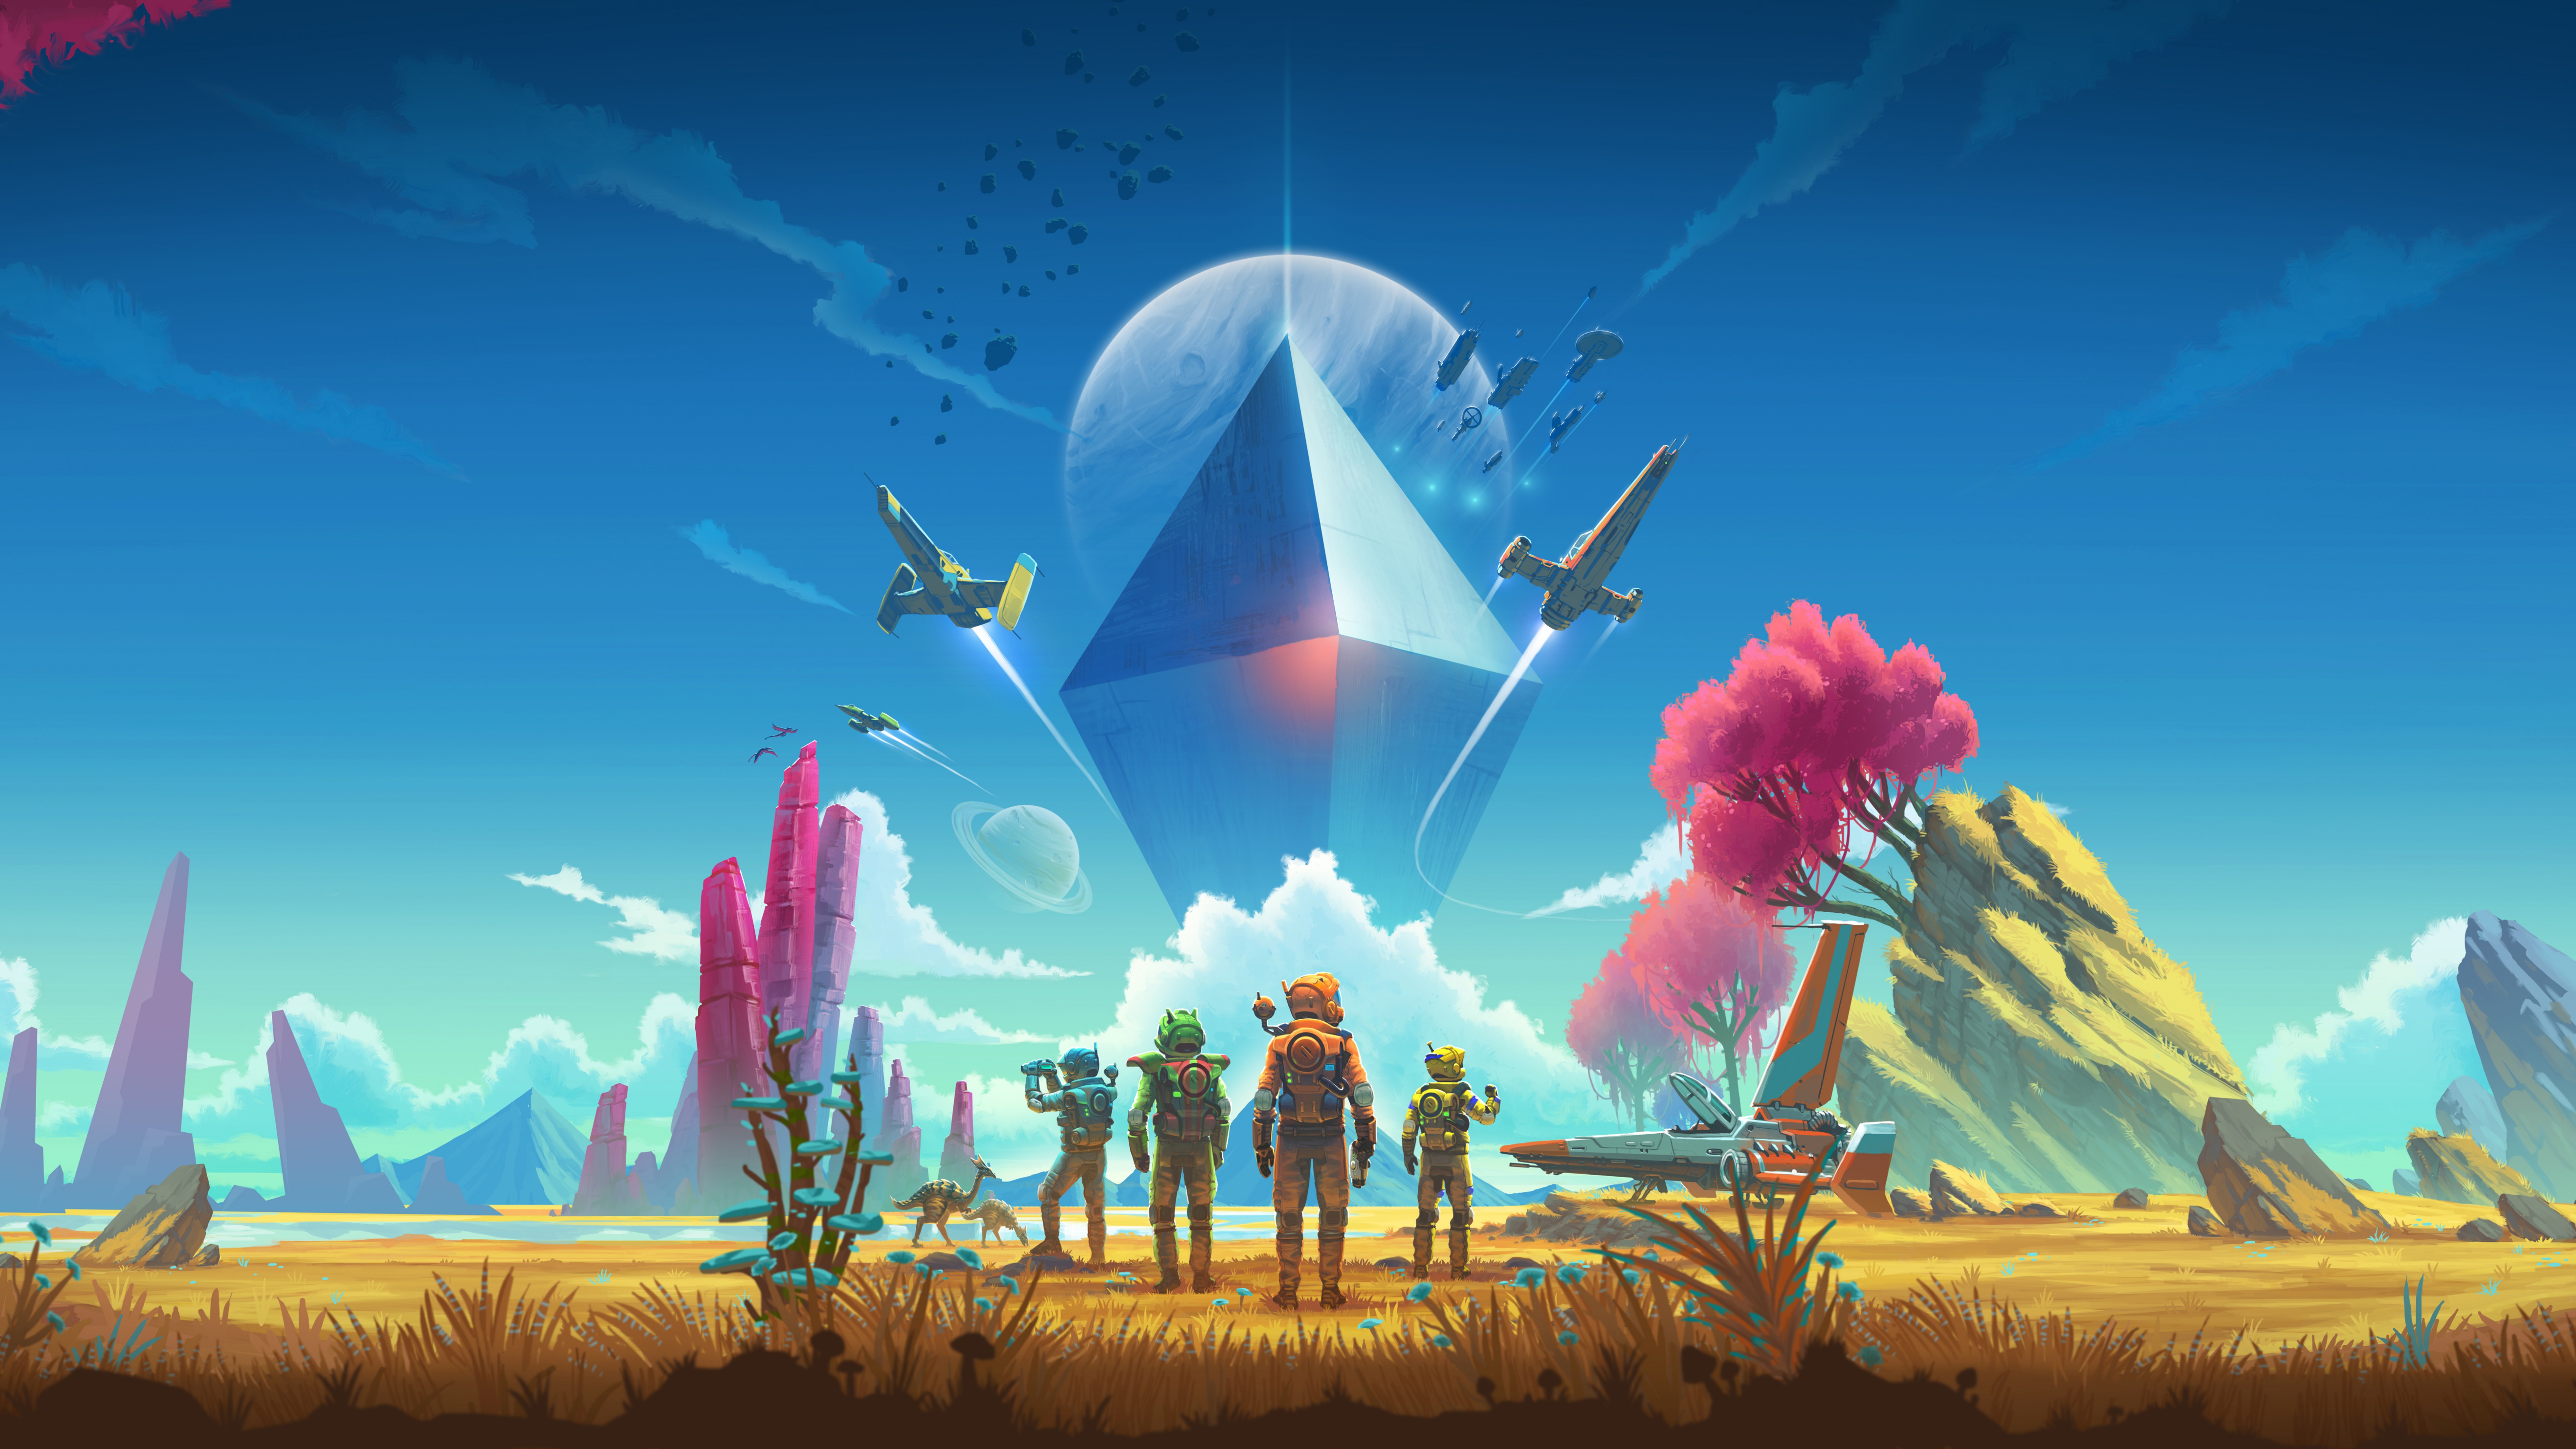 No Mans Sky Centered From Behind Aircraft Geometric Figures Spacesuit Planes Planet 7680x4320